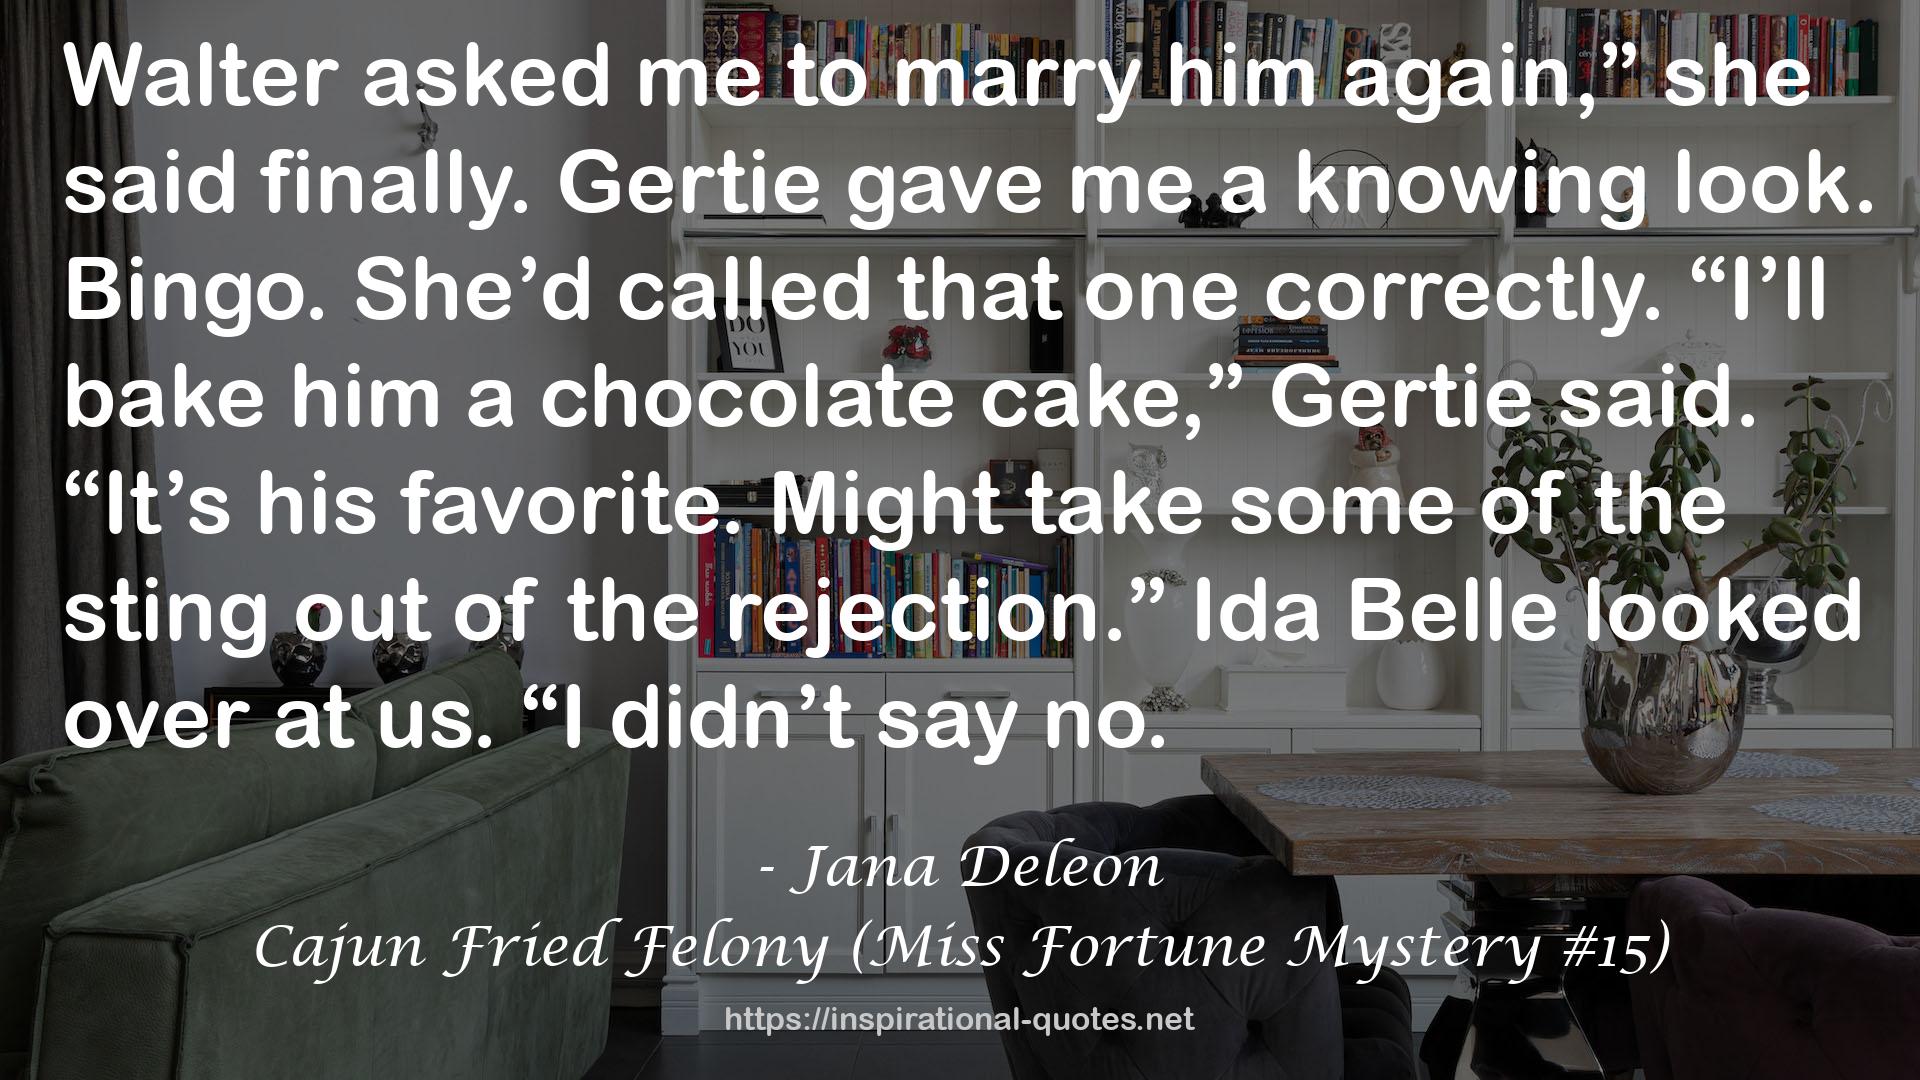 Cajun Fried Felony (Miss Fortune Mystery #15) QUOTES